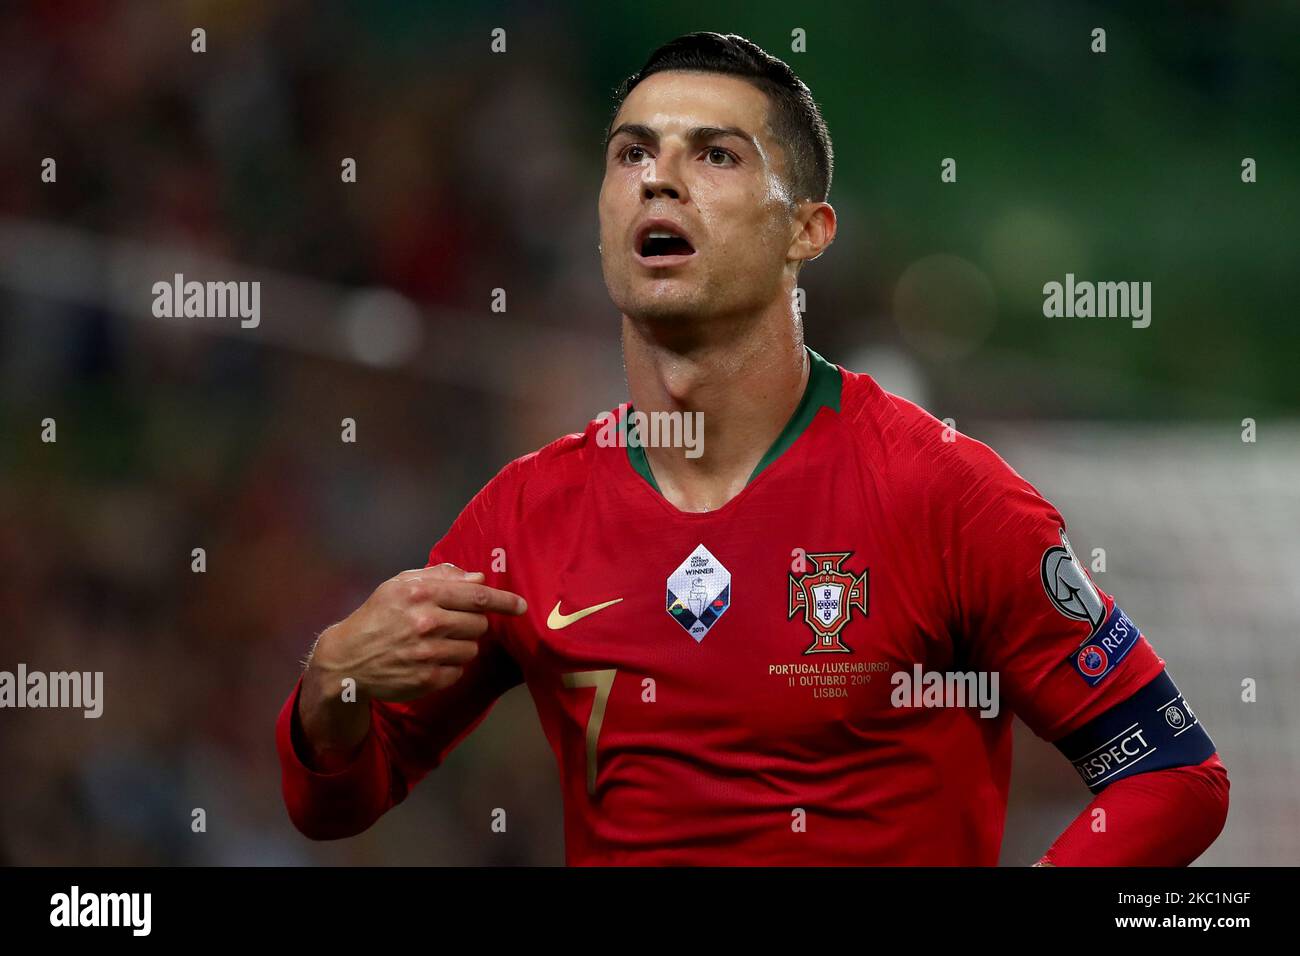 Portuguese soccer star Cristiano Ronaldo has tested positive for COVID-19,  Portugals Football Federation said in a statement in Lisbon, Portugal, on  October 13, 2020. The 35-year-old Juventus striker will miss Wednesdays UEFA